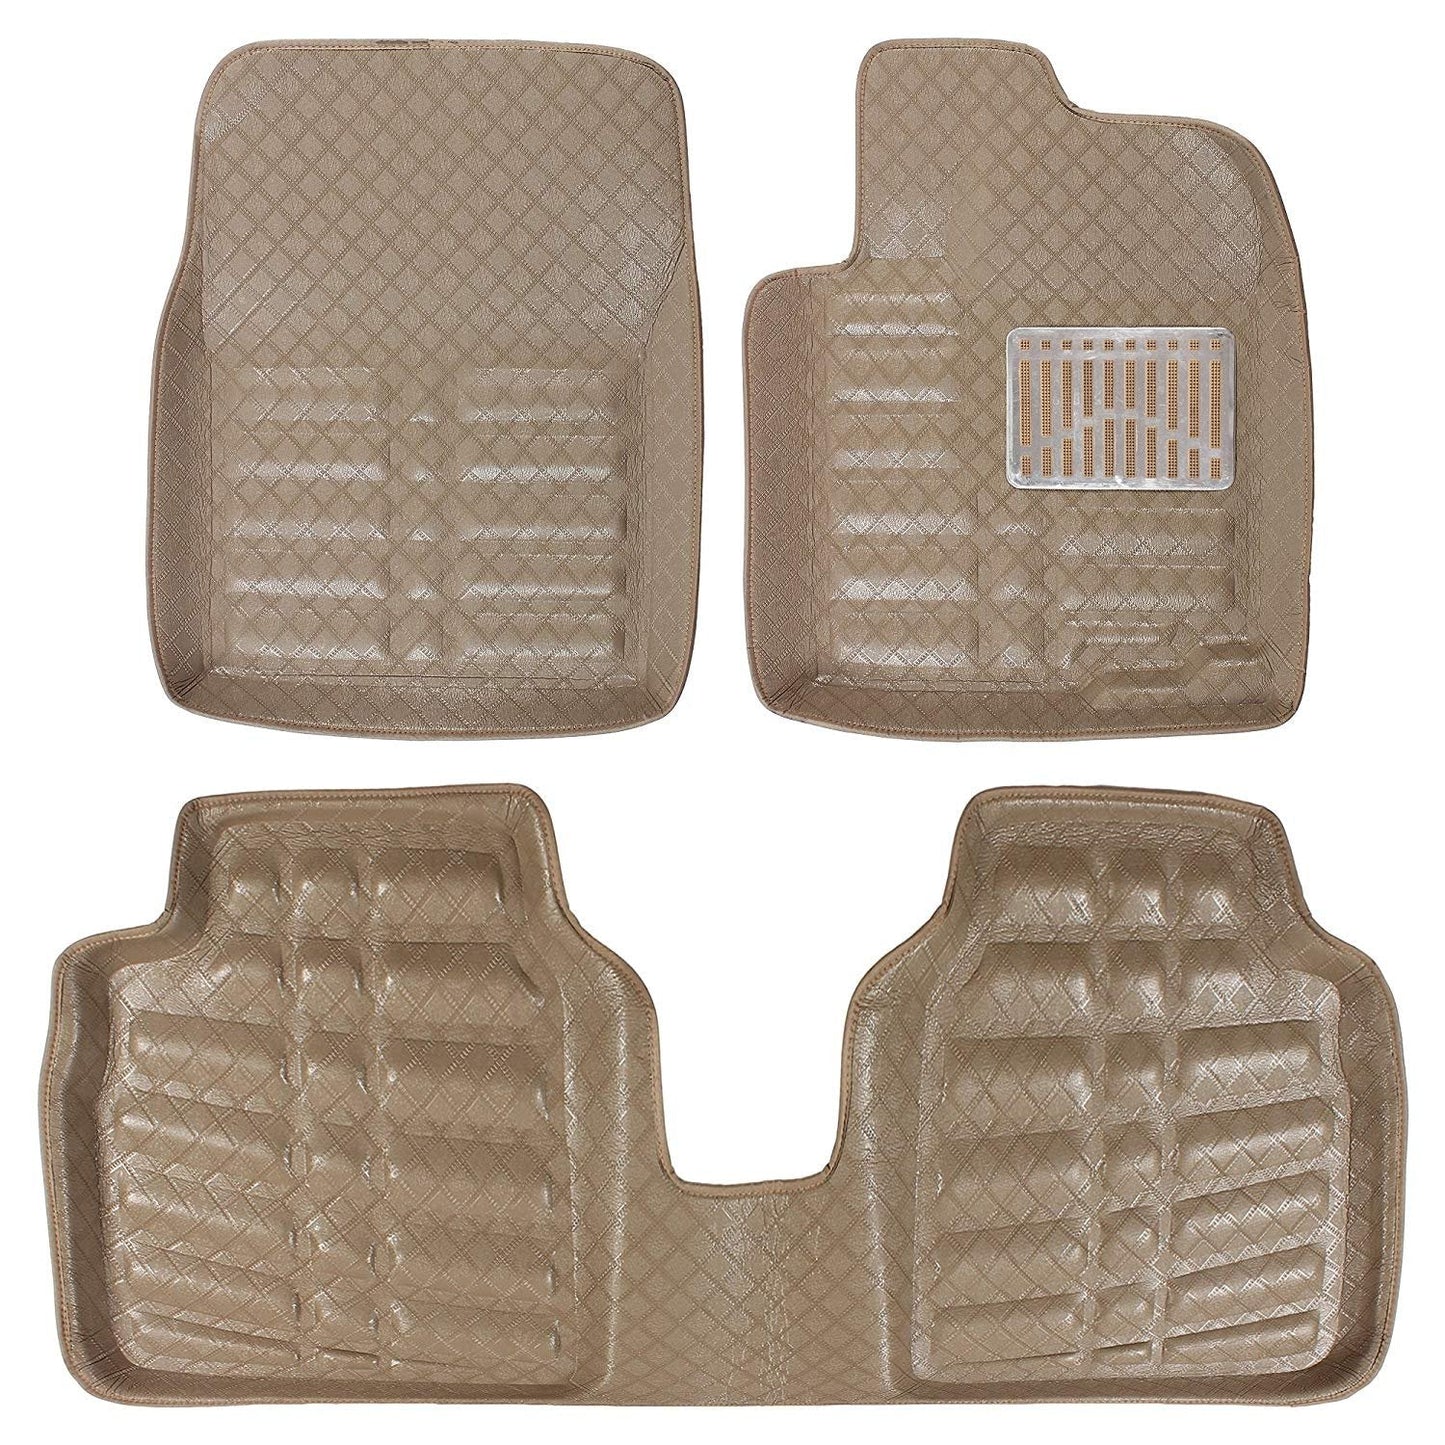 Oshotto 4D Artificial Leather Car Floor Mats For Volkswagen Polo - Set of 3 (2 pcs Front & one Long Single Rear pc) - Beige